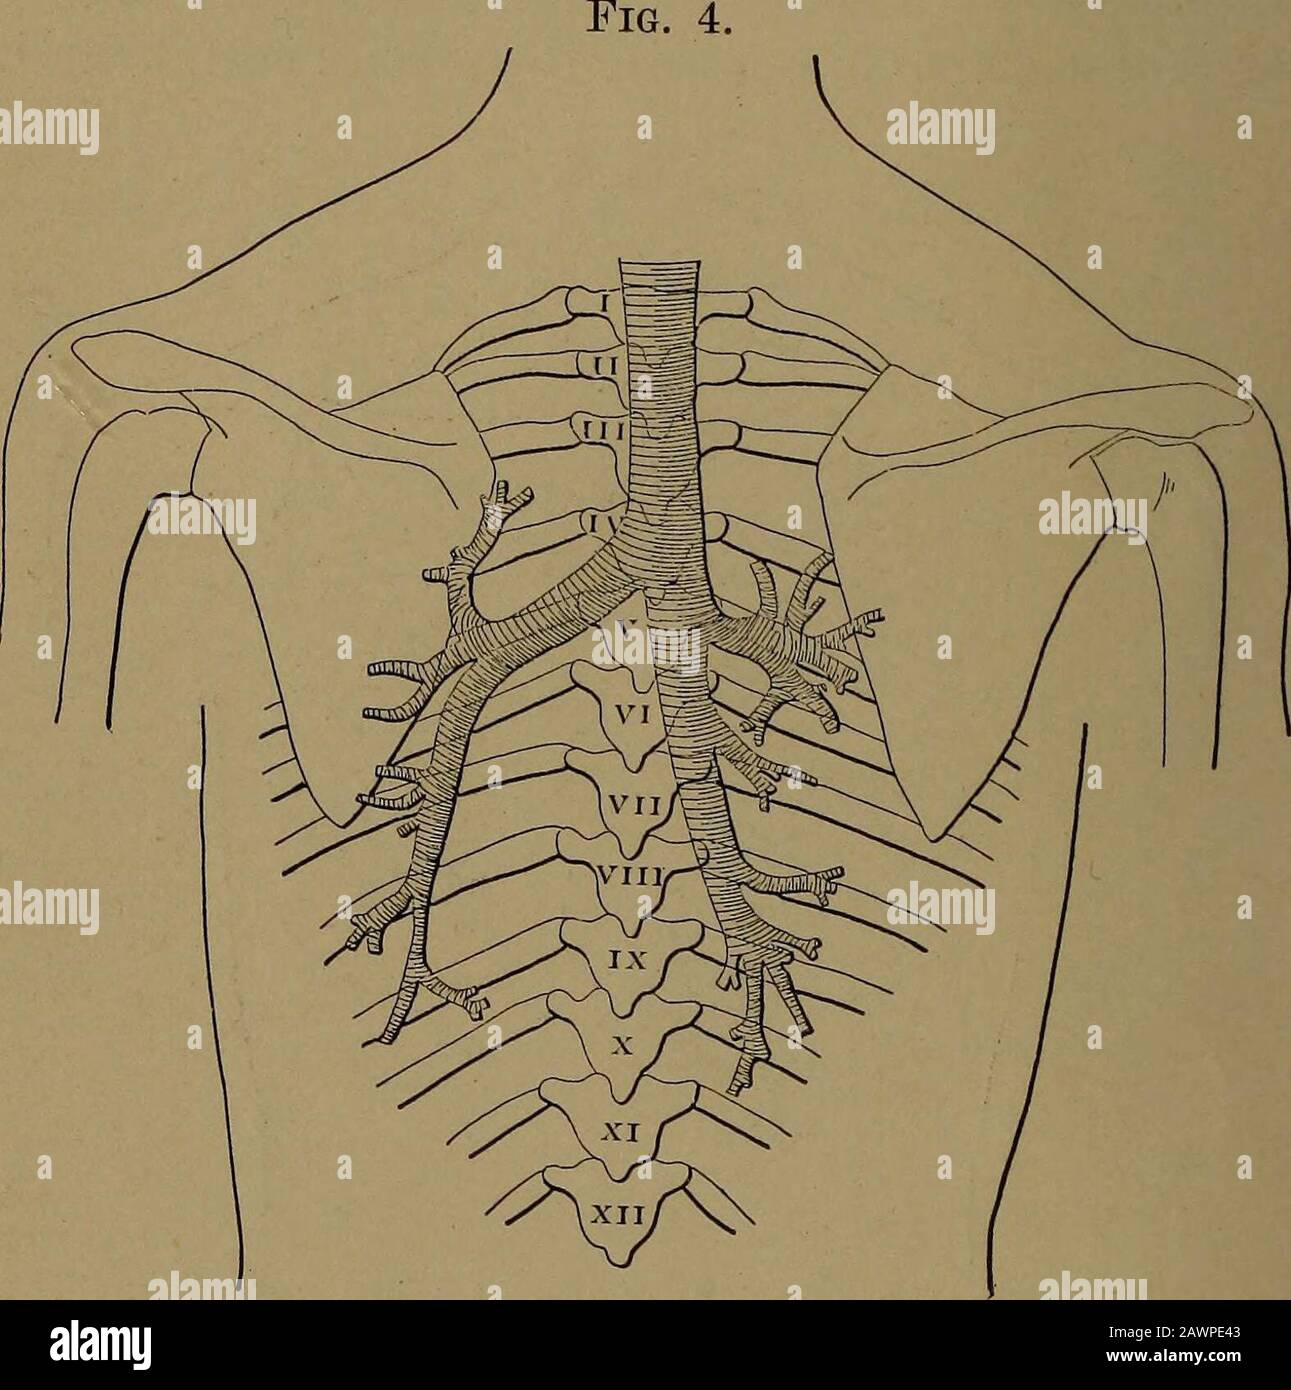 Rib Cage Drawing - How To Draw A Rib Cage Step By Step